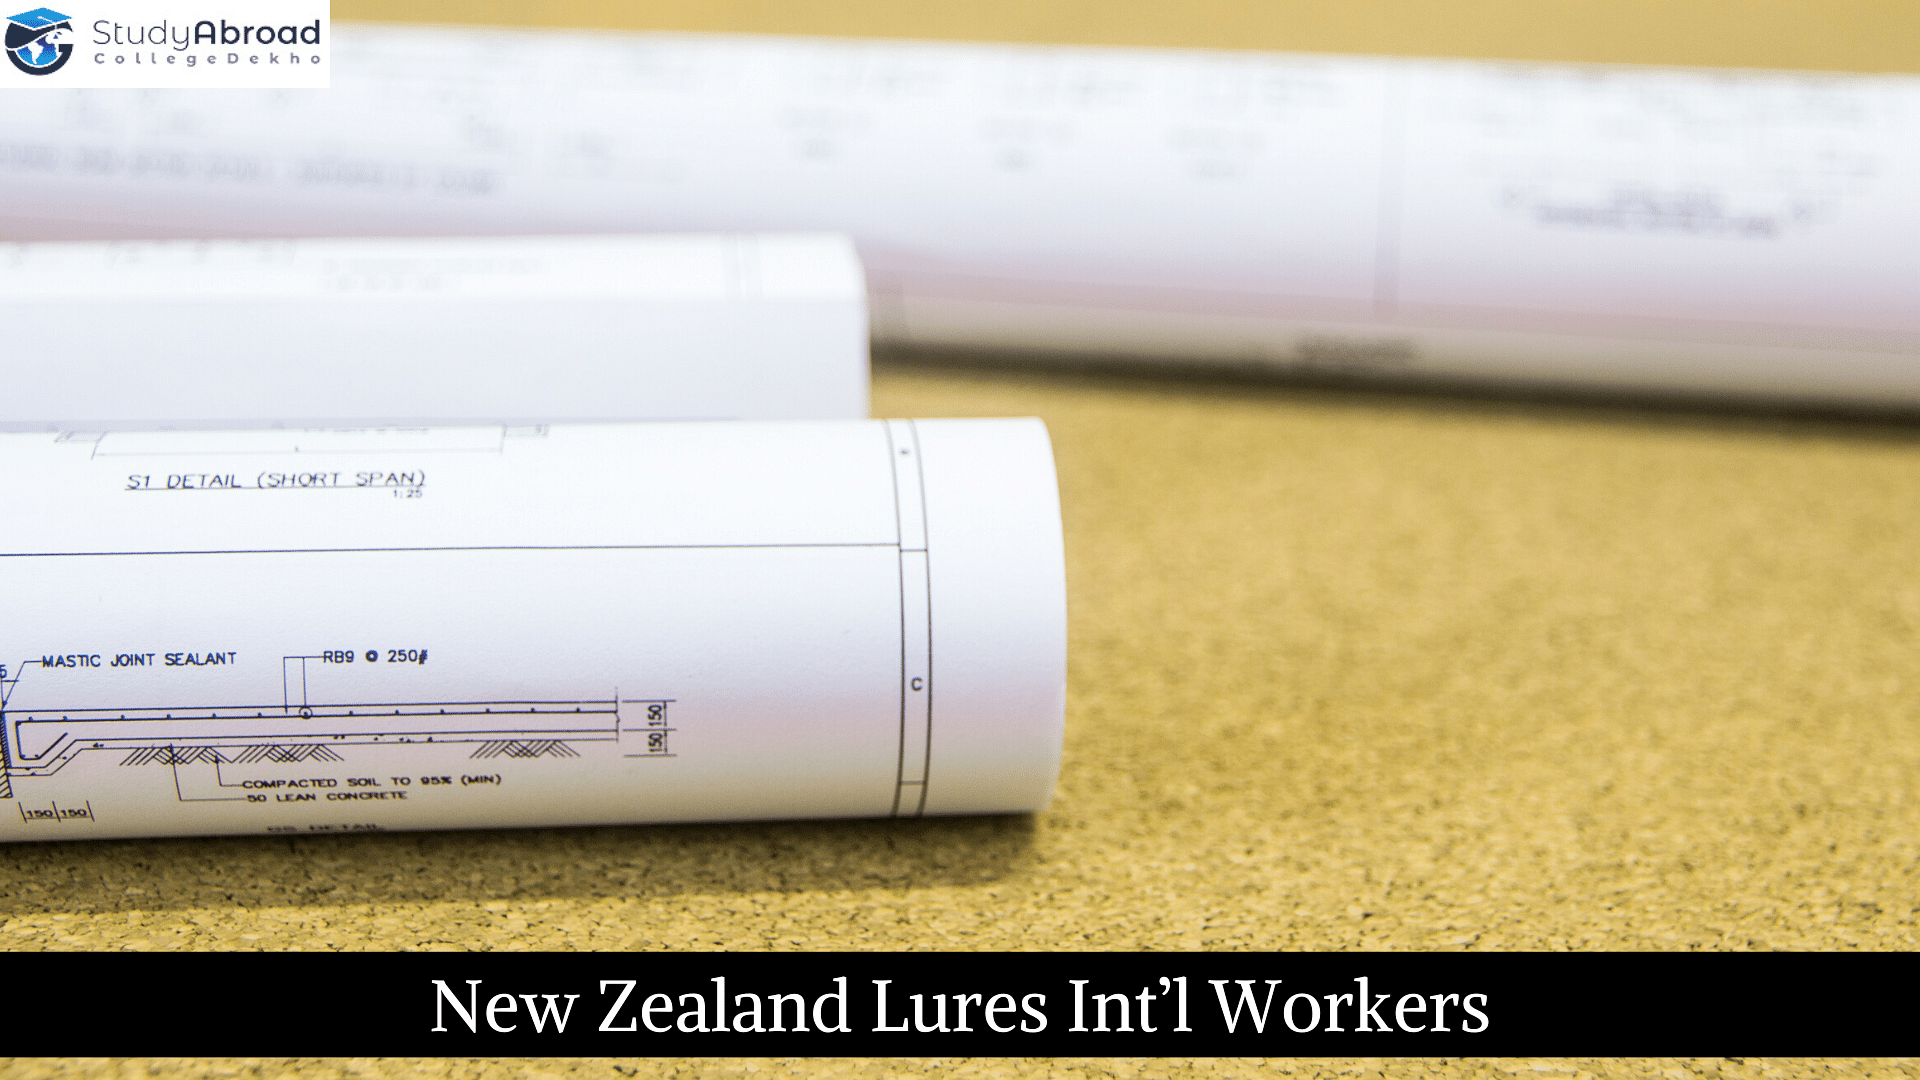 New Zealand Lures Int’l Workers